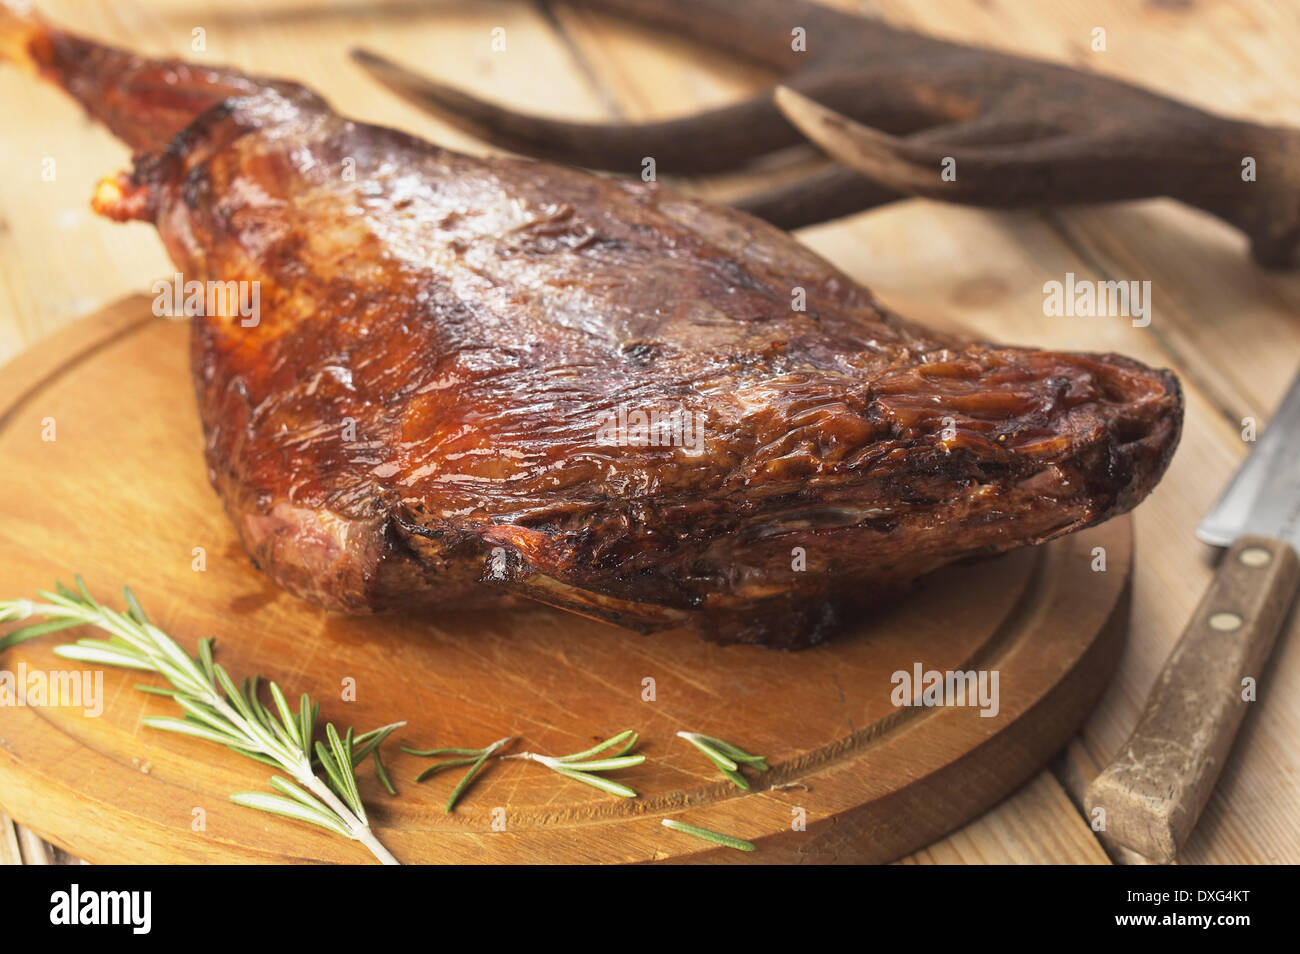 Roast Haunch Of Venison Ready To Carve Stock Photo